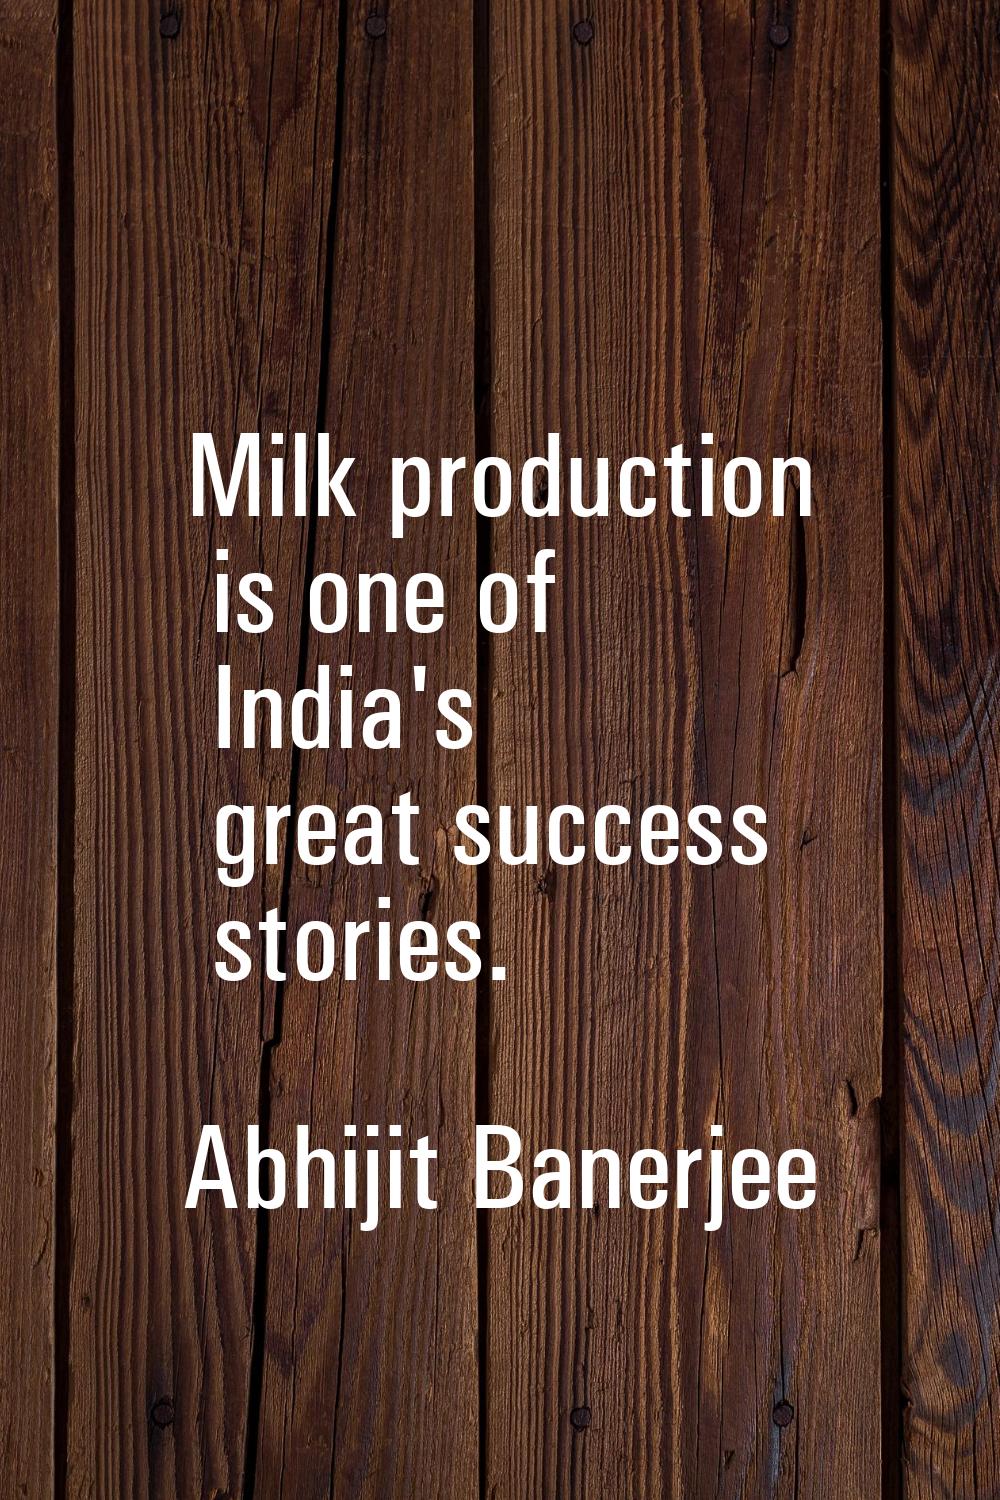 Milk production is one of India's great success stories.